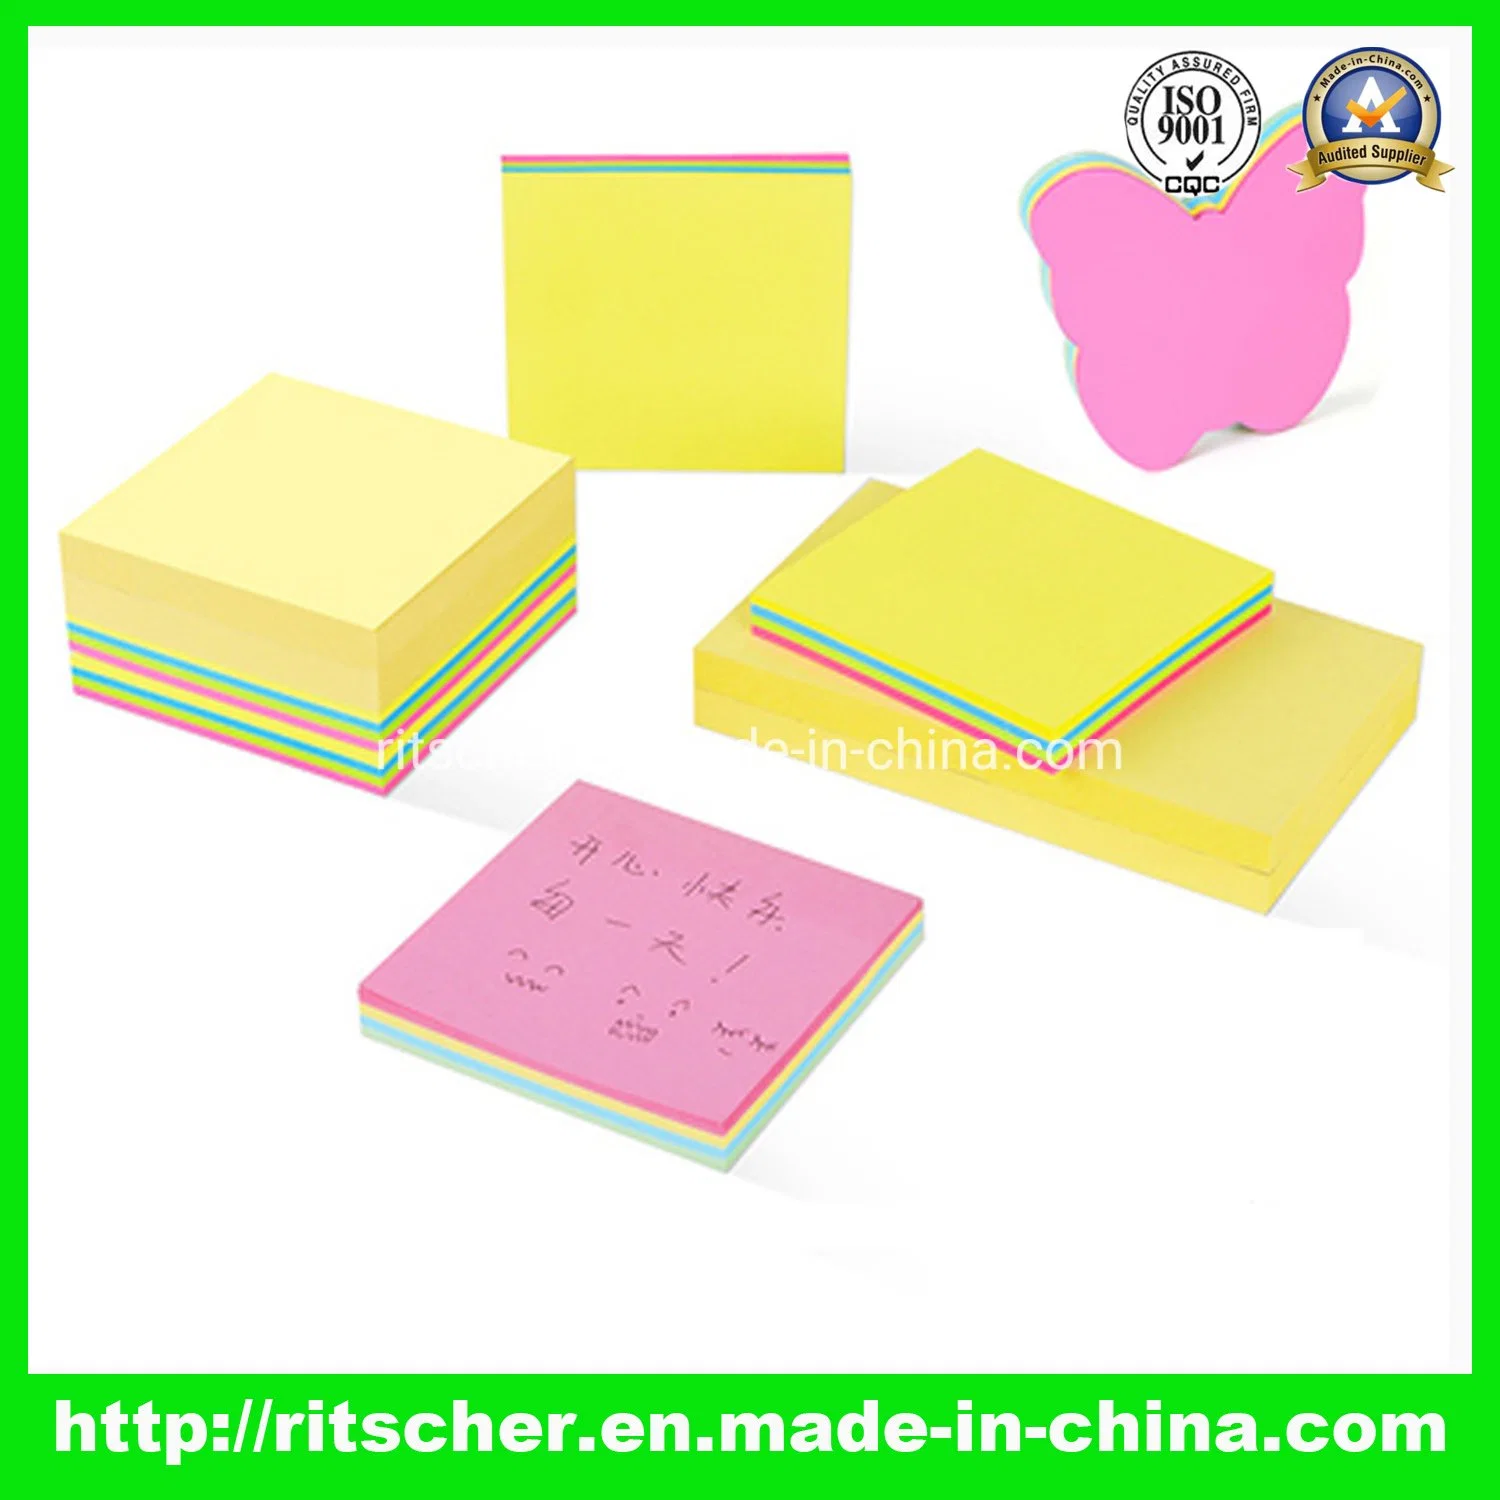 Promotion Gift Stationery Plastic Self-Adhesive Sticky Notes for Office and School Supply